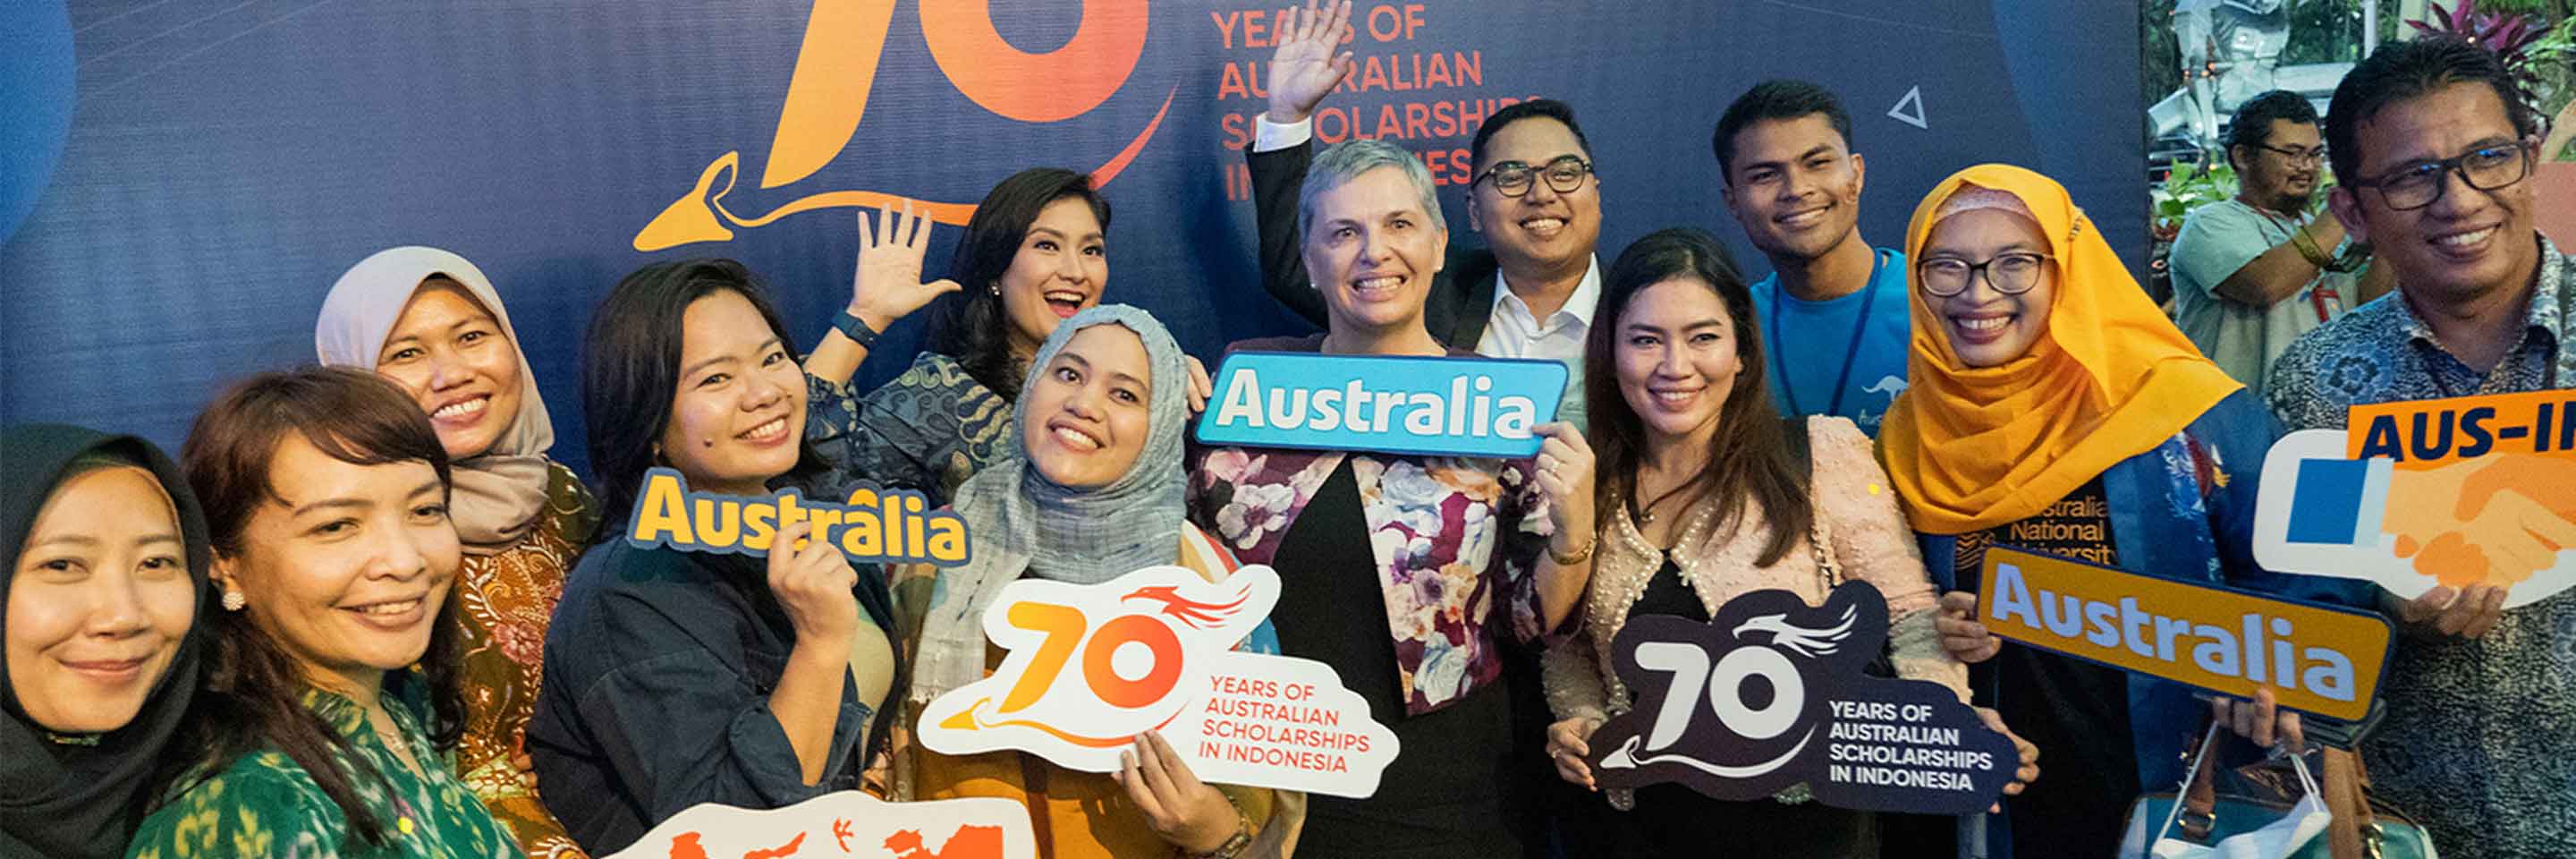 Amidst the excitement of the "70 Years of Australian Scholarships in Indonesia" campaign launch, the alumni have the delightful opportunity to capture a memorable wefie with the Australian Ambassador to Indonesia.